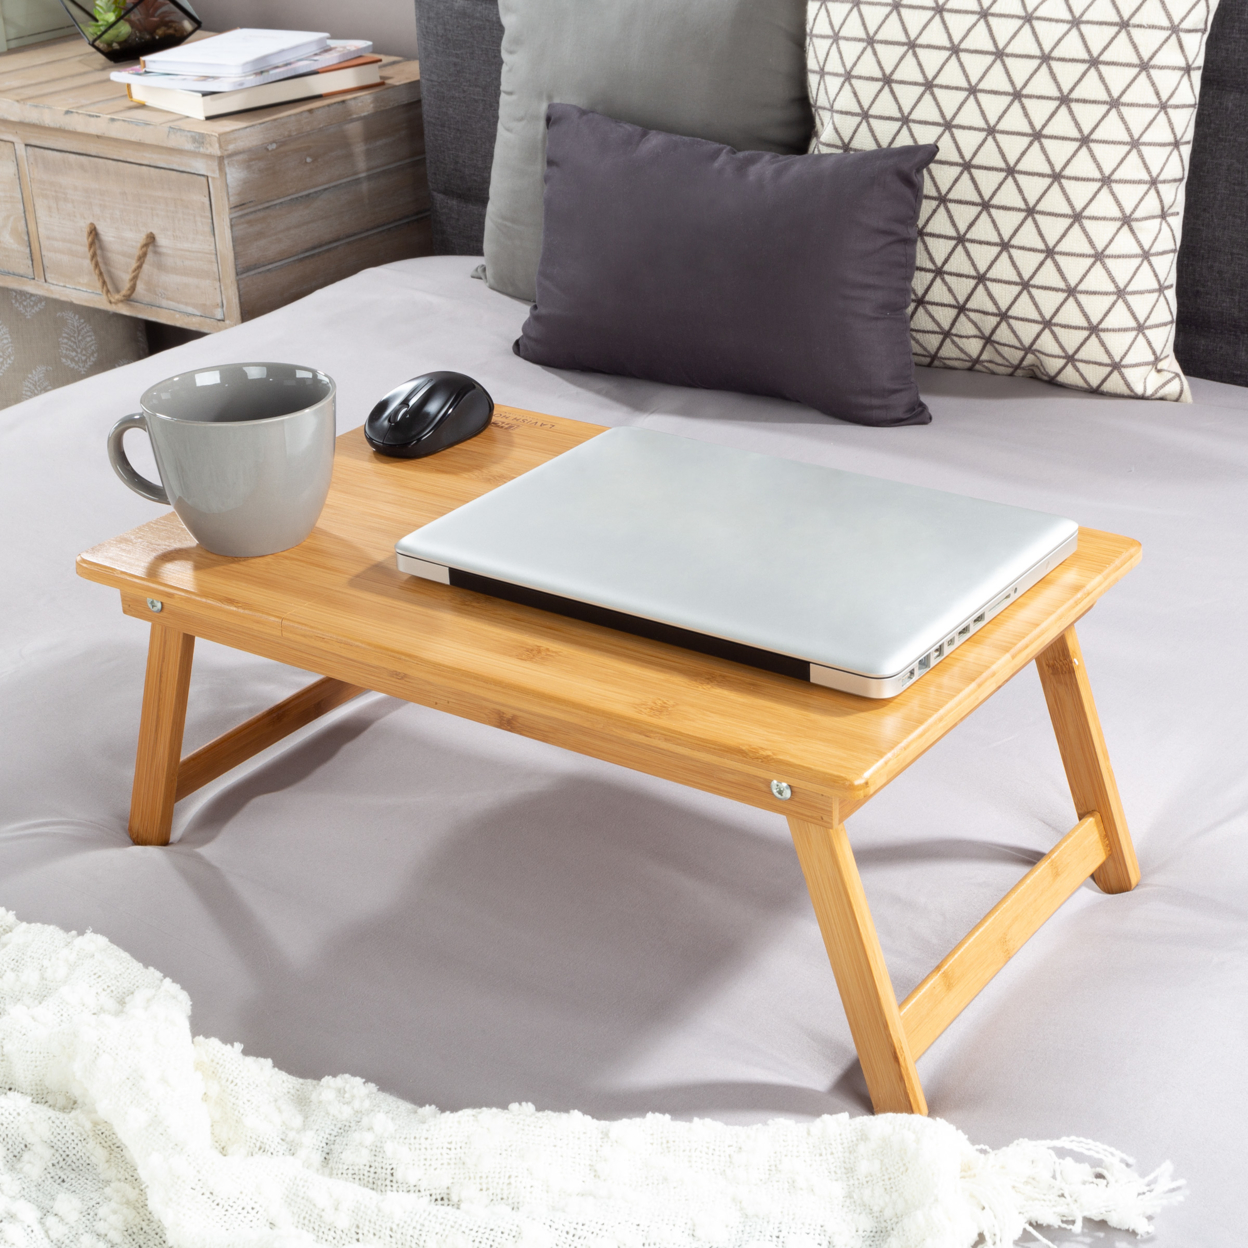 Lap Desk Bamboo Travel Tray With Magnetic Base Breakfast In Bed TV Tray